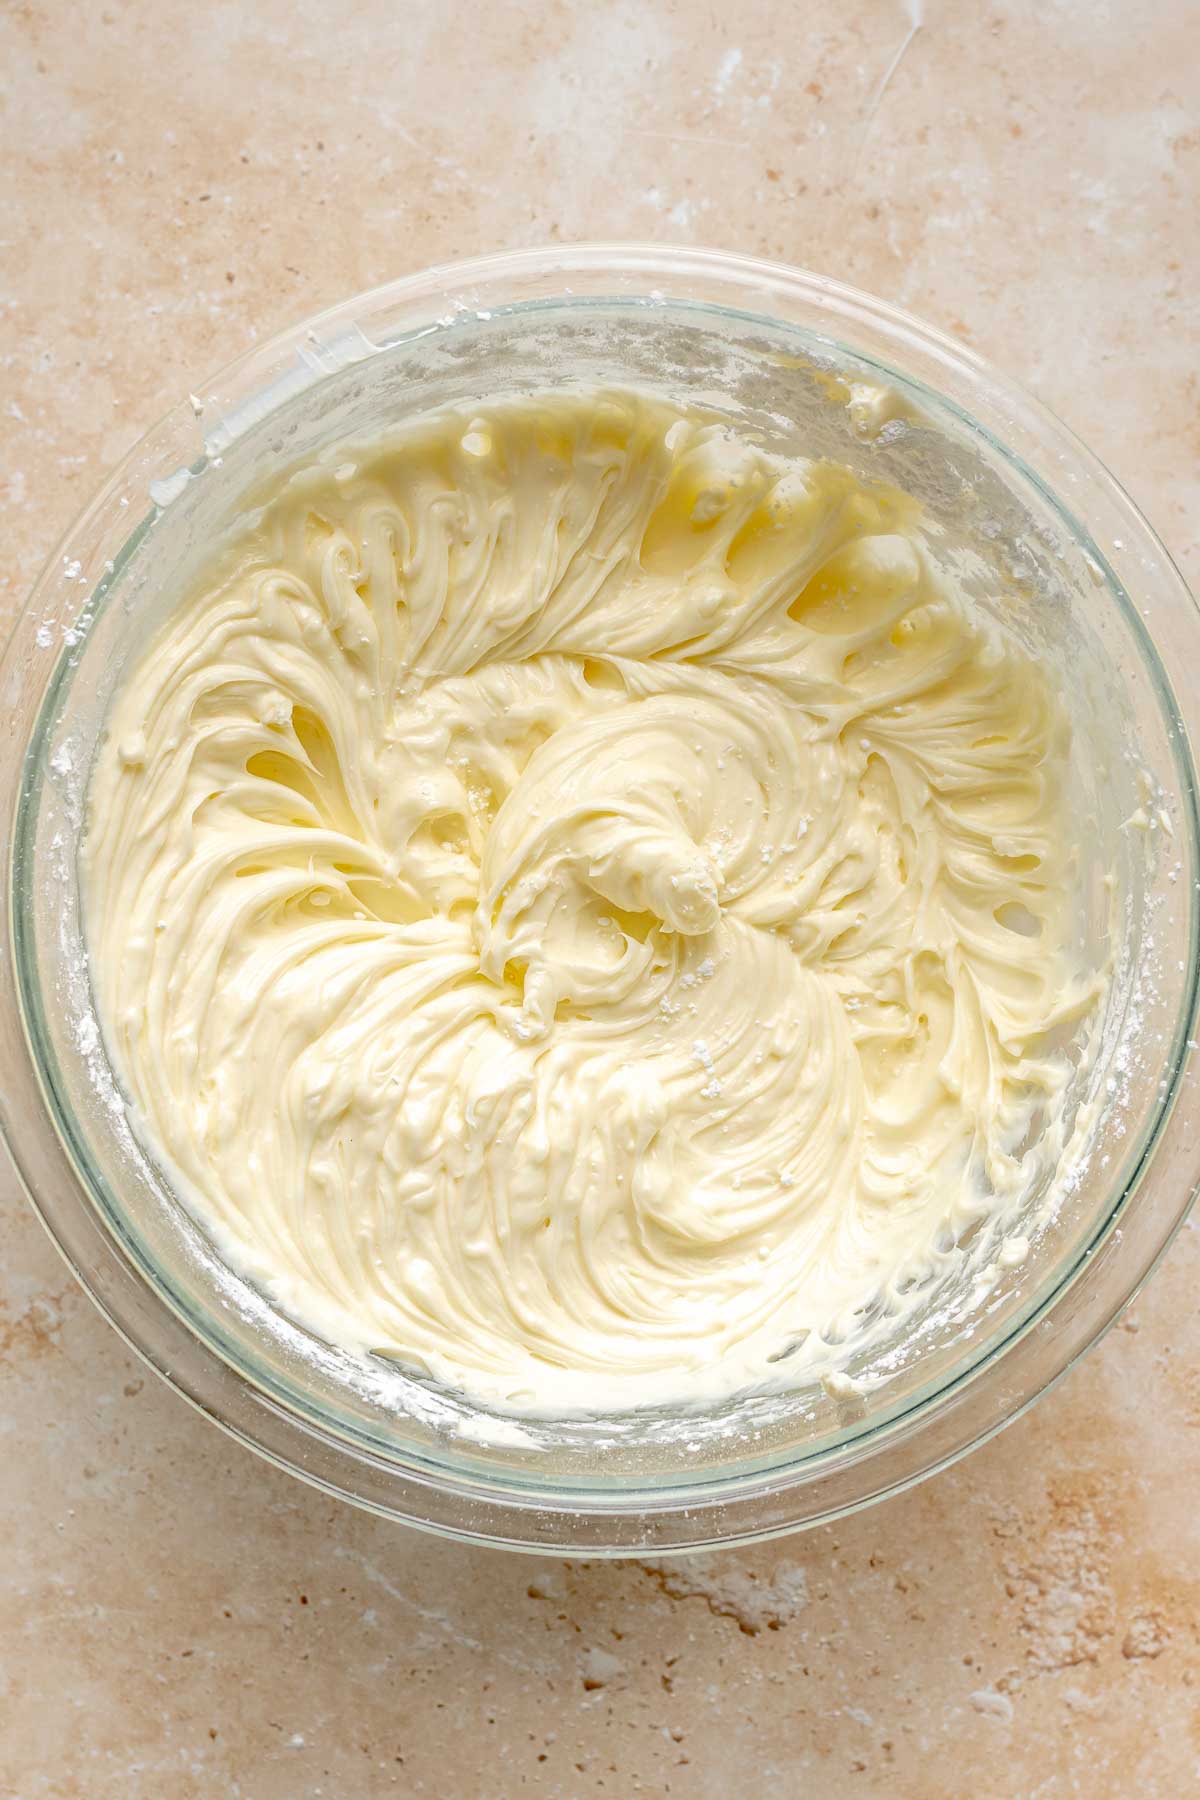 Creamed cheesecake batter in a mixing bowl.